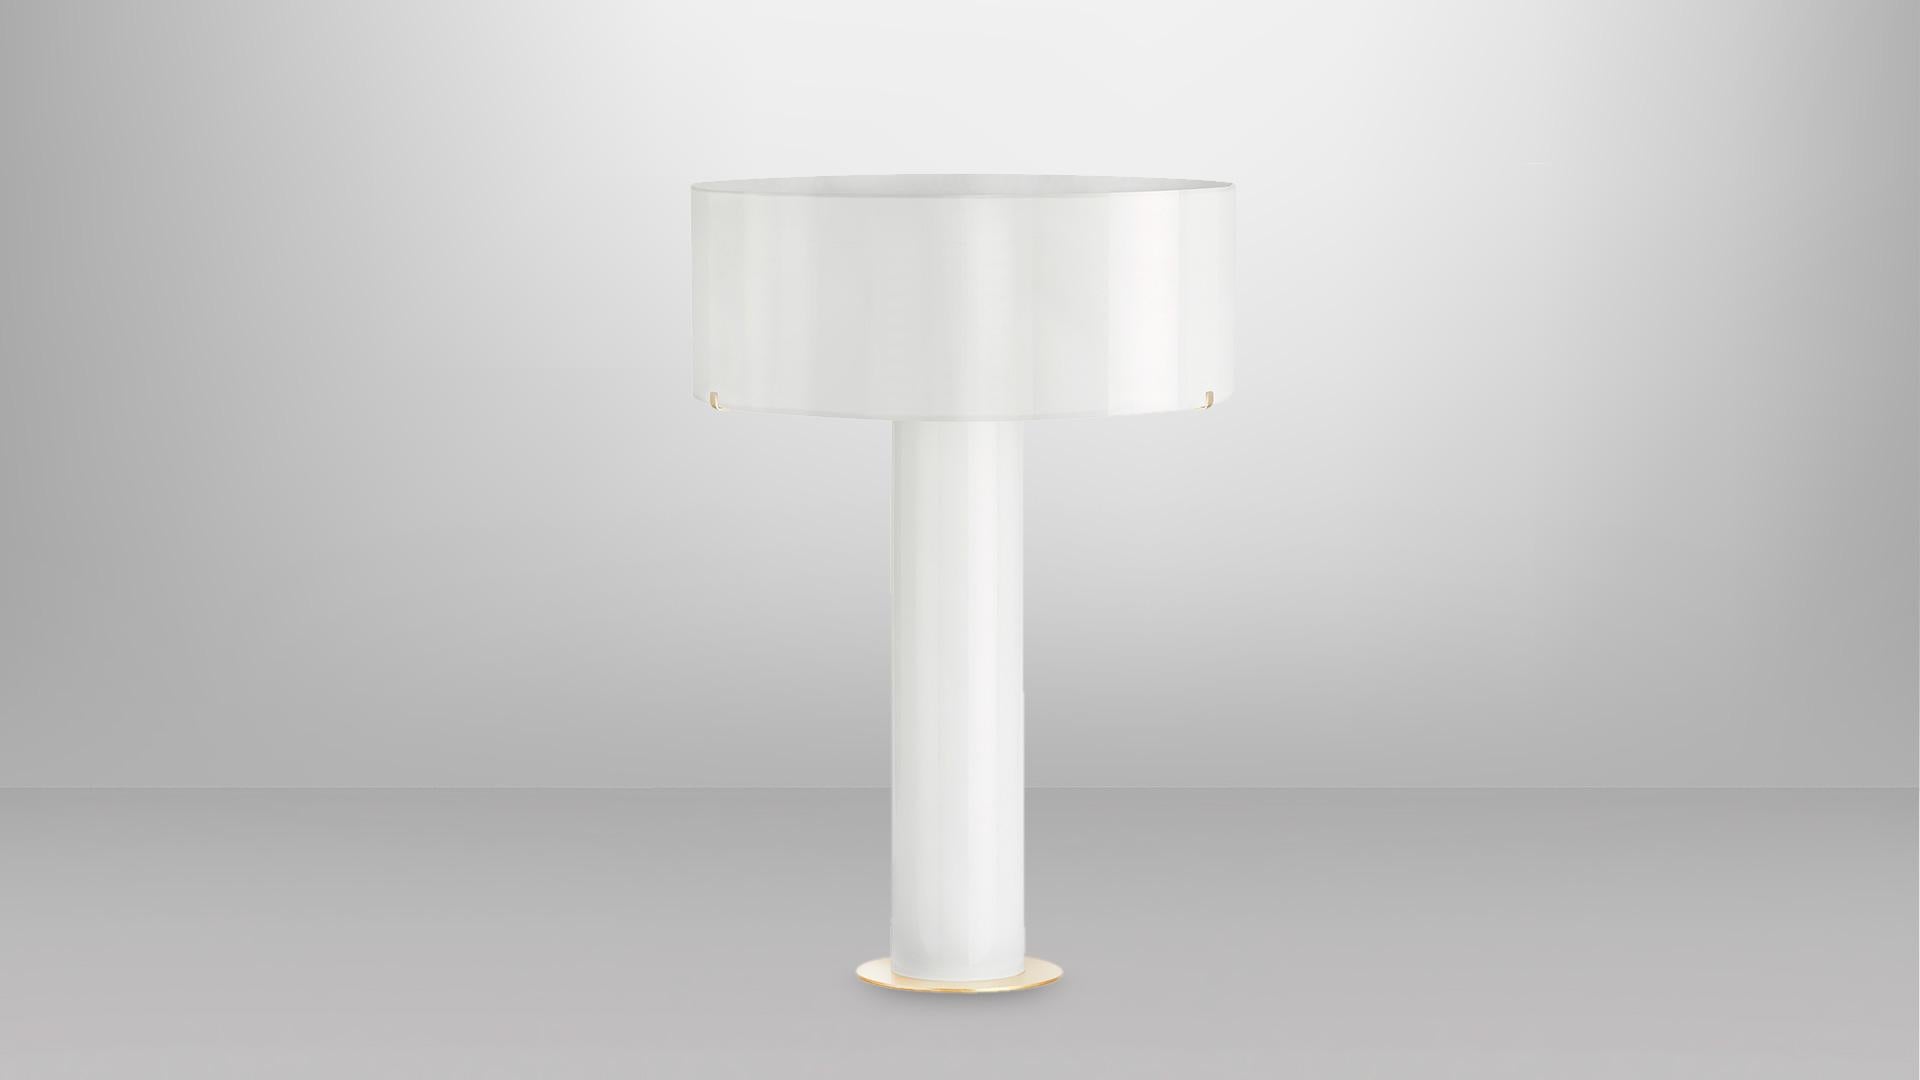 Imperial glass shade table lamp by CTO Lighting
Materials: opal white glass, satin brass
Dimensions: 38.5 x H 56 cm

All our lamps can be wired according to each country. If sold to the USA it will be wired for the USA for instance.

2 x E12, 60w